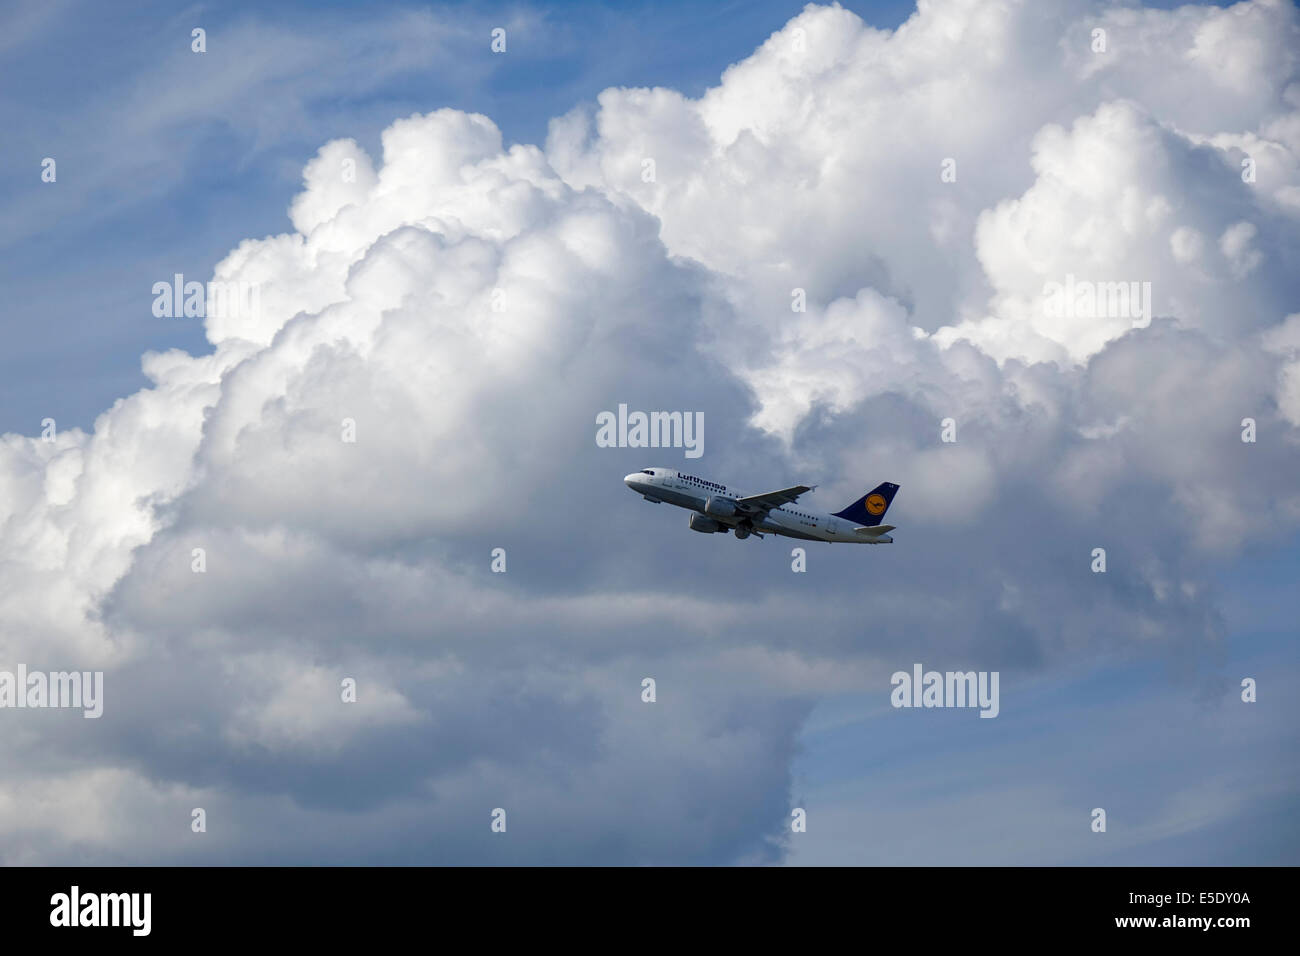 Lufthansa passenger aircraft after take-off from the airport in Munich, Bavaria, Germany, Europe Stock Photo